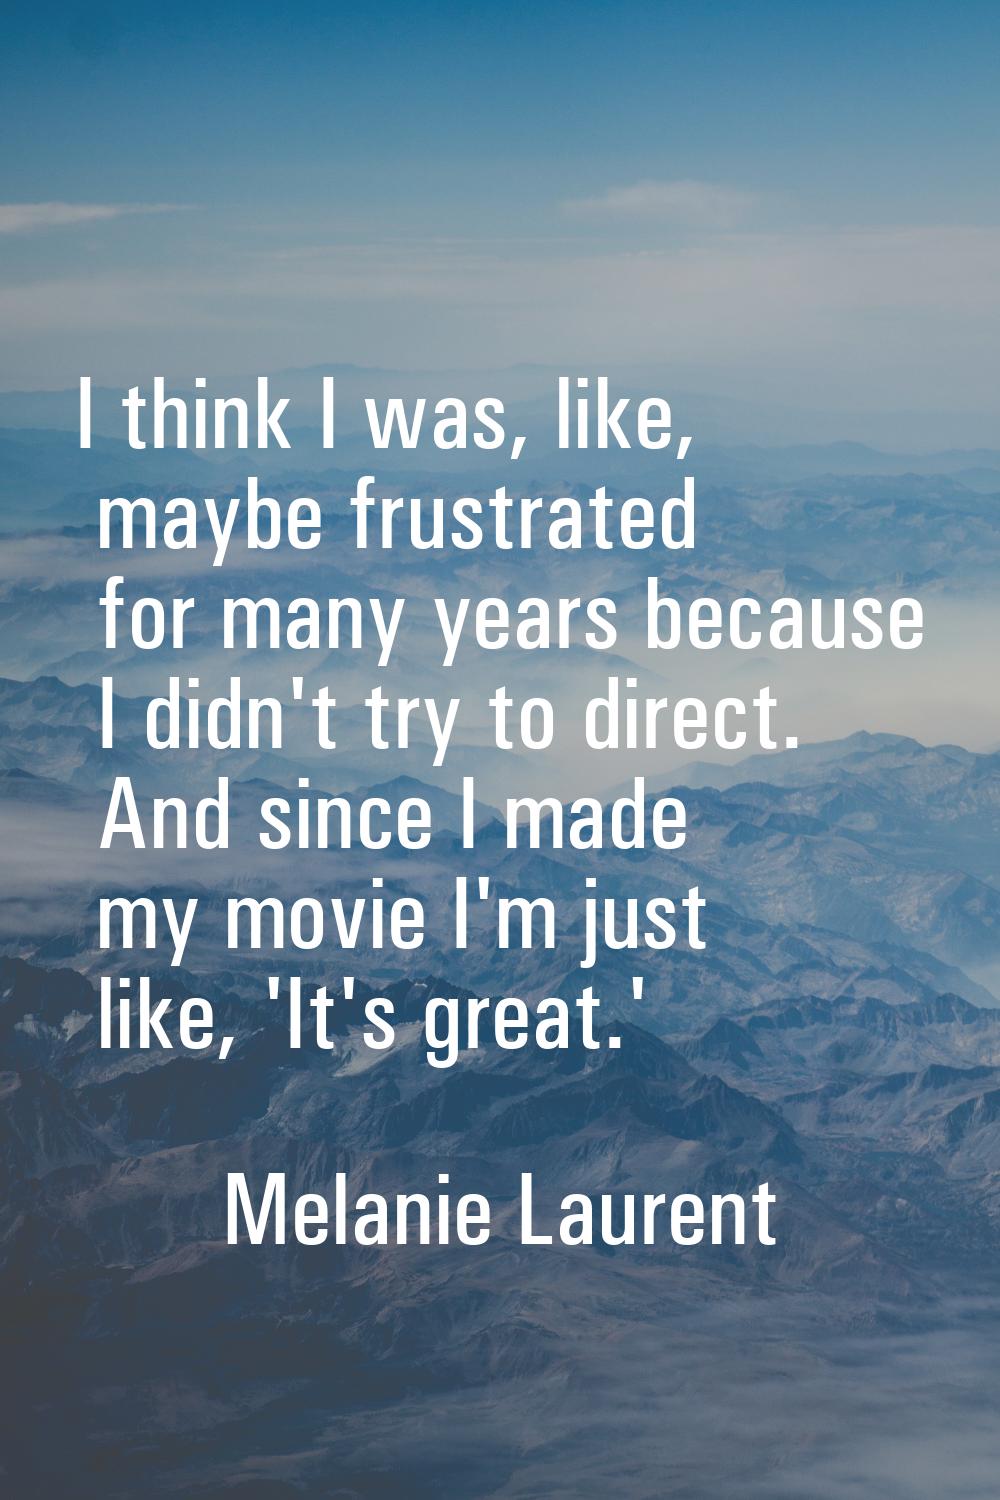 I think I was, like, maybe frustrated for many years because I didn't try to direct. And since I ma